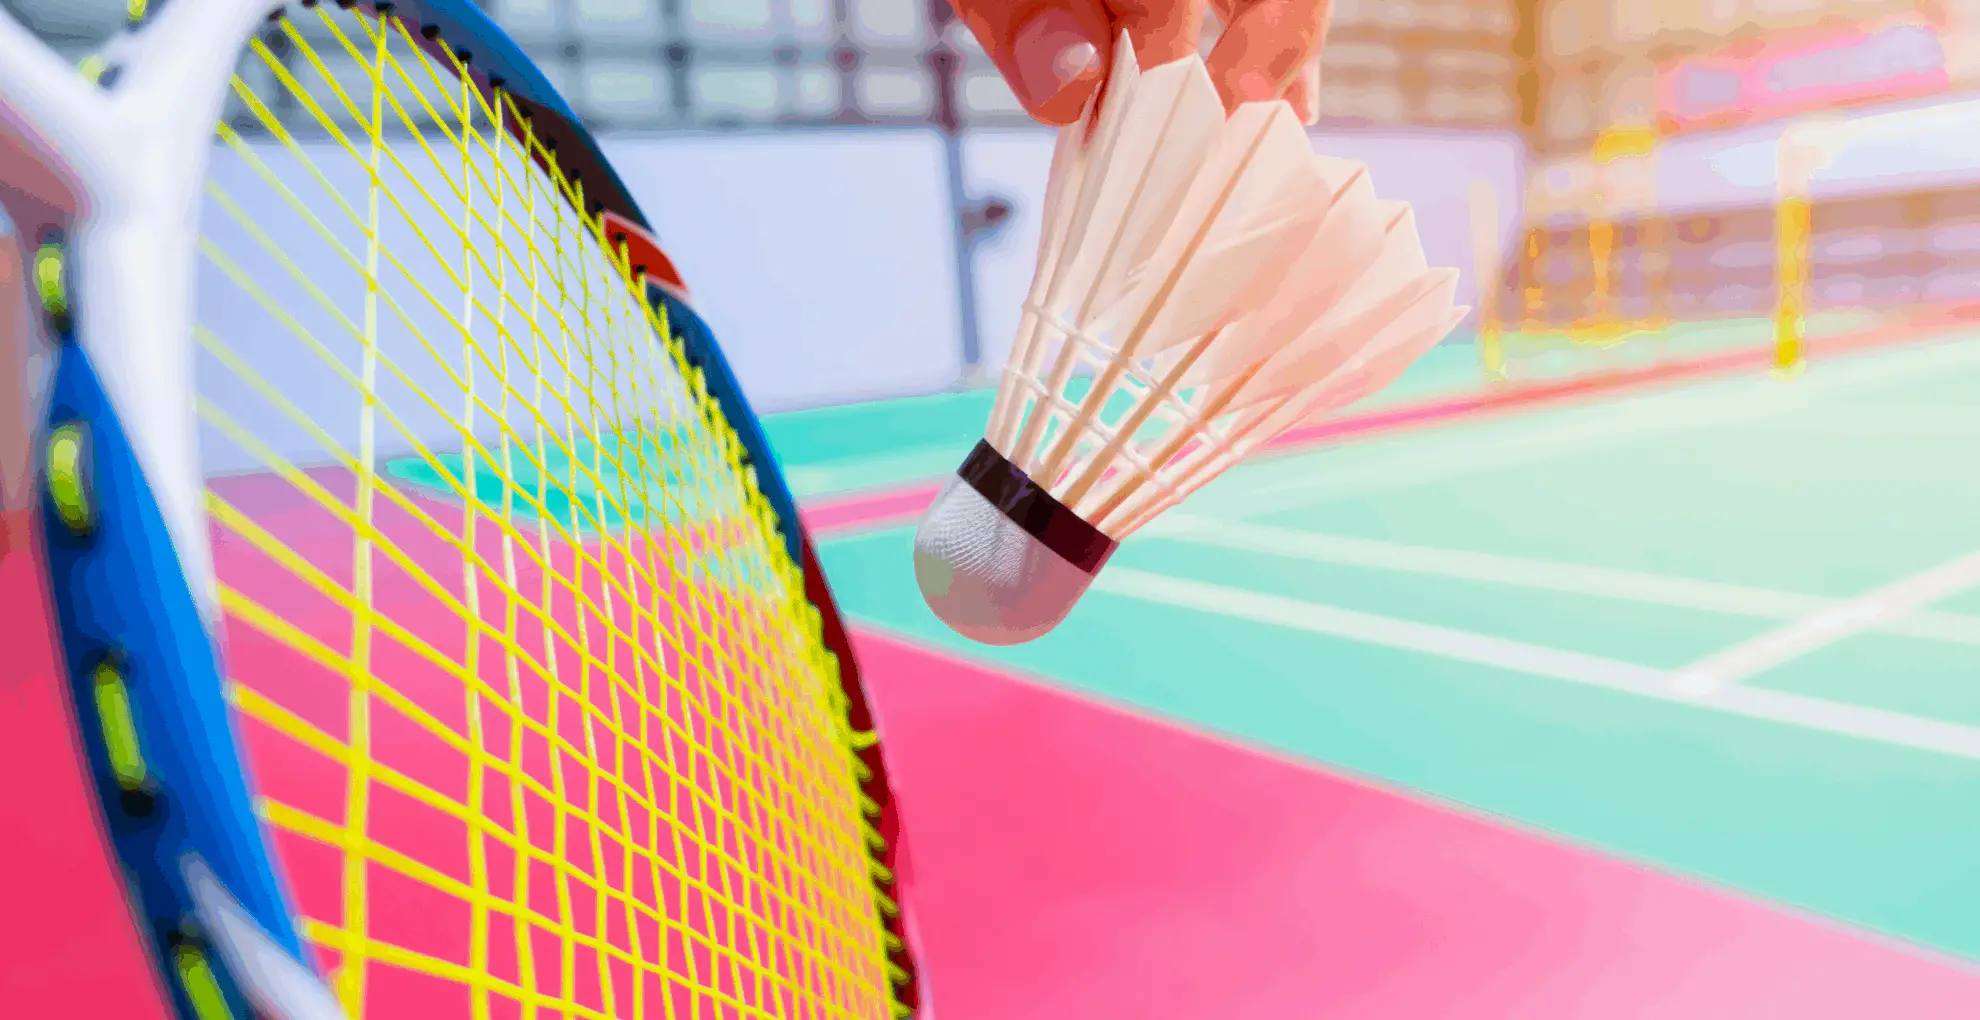 What Are The Differences Between Badminton And Pickleball?